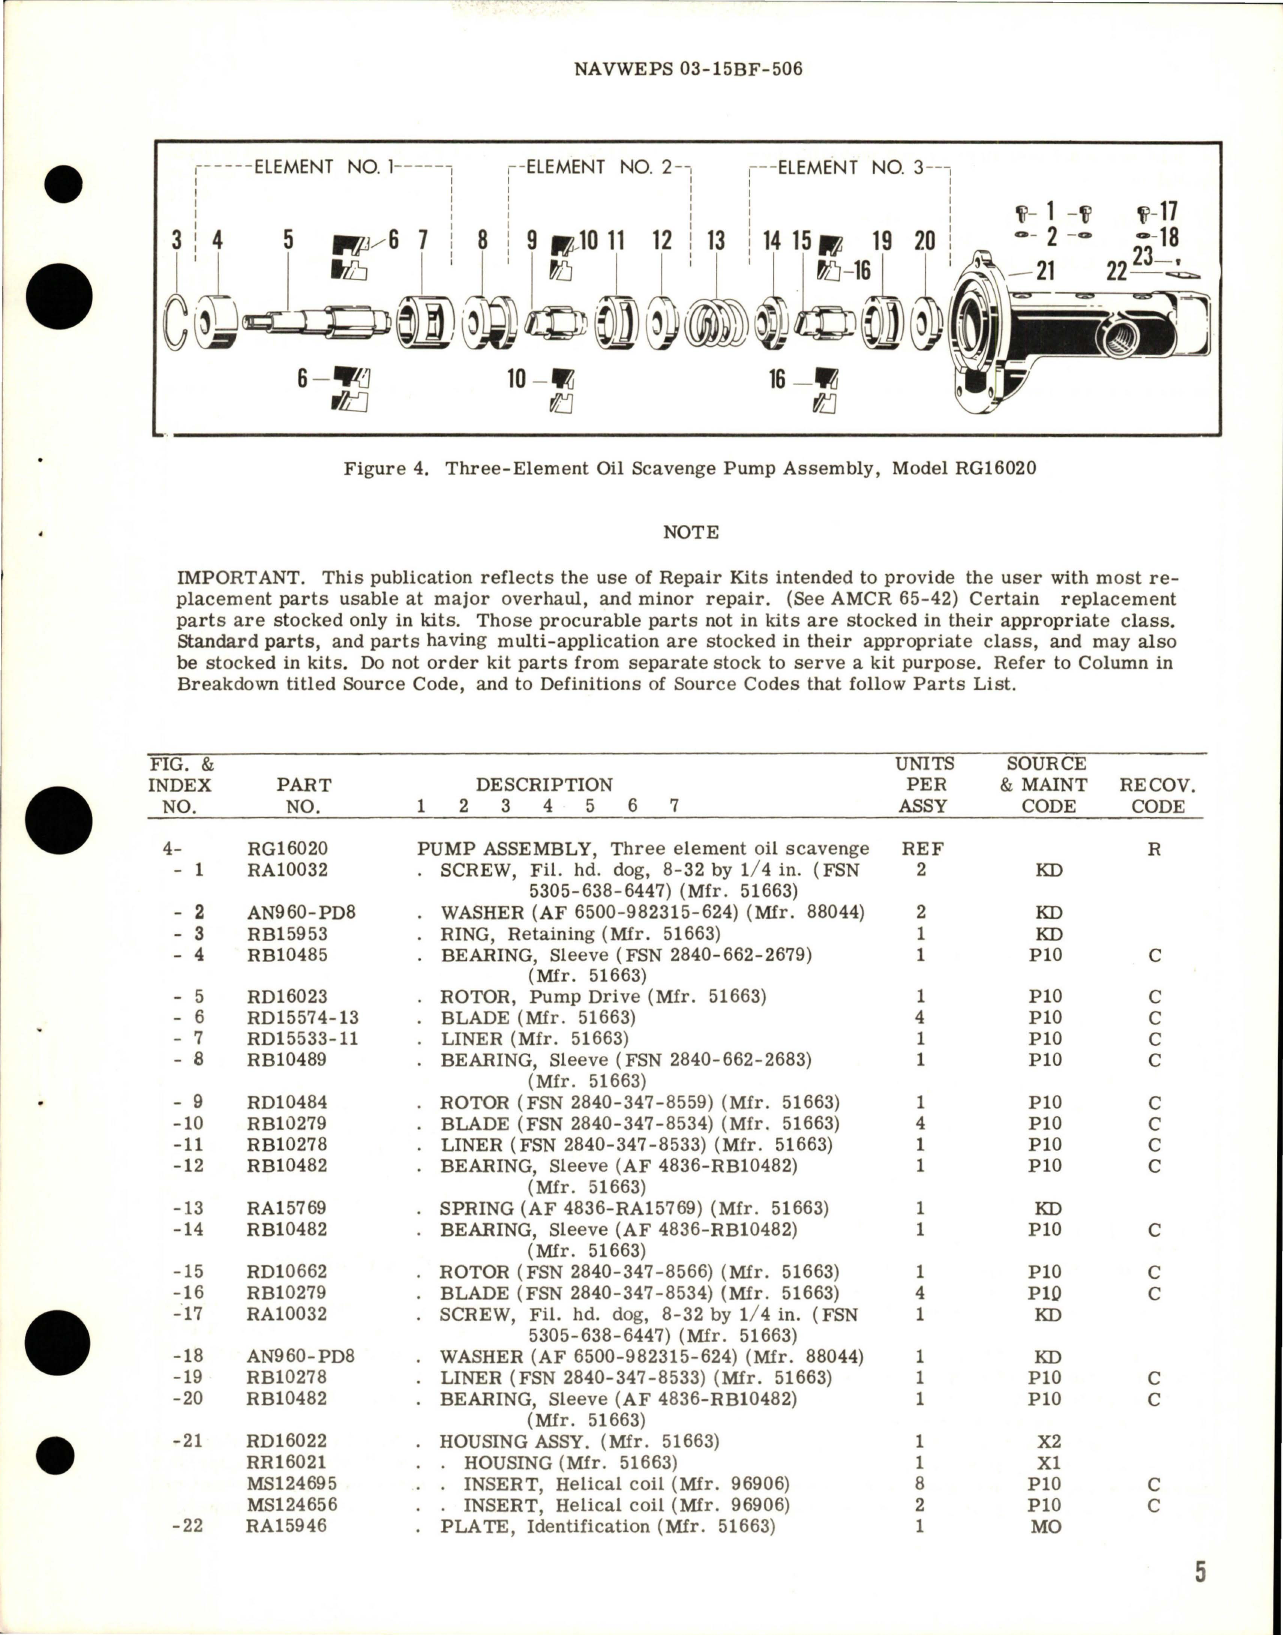 Sample page 5 from AirCorps Library document: Overhaul Instructions with Parts Breakdown for Oil Scavenge Pump - Model RG-16020